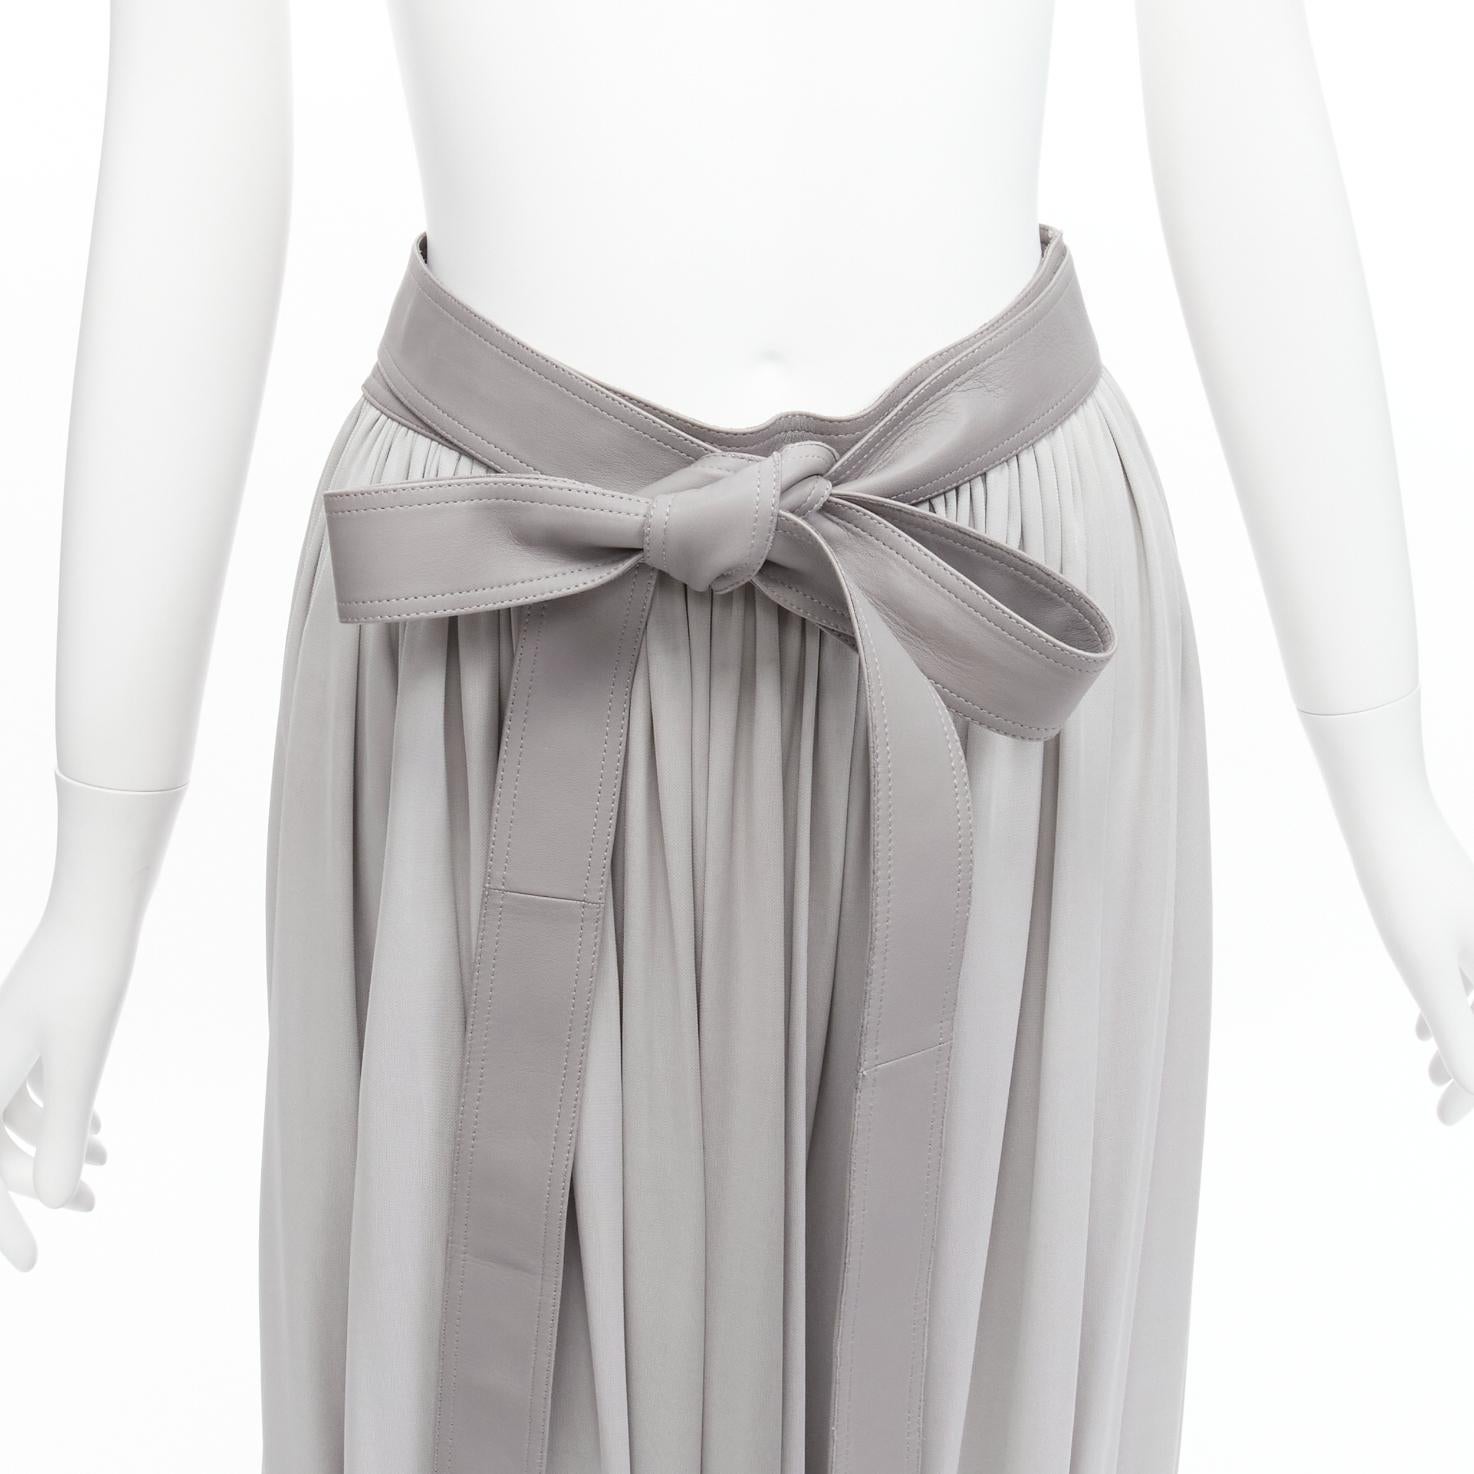 OLD CELINE Phoebe Philo grey lambskin leather tie belt pleated midi skirt FR38 M
Reference: TGAS/D00228
Brand: Celine
Designer: Phoebe Philo
Material: Lambskin Leather, Rayon
Color: Grey
Pattern: Solid
Closure: Wrap Tie
Lining: Grey Fabric
Extra